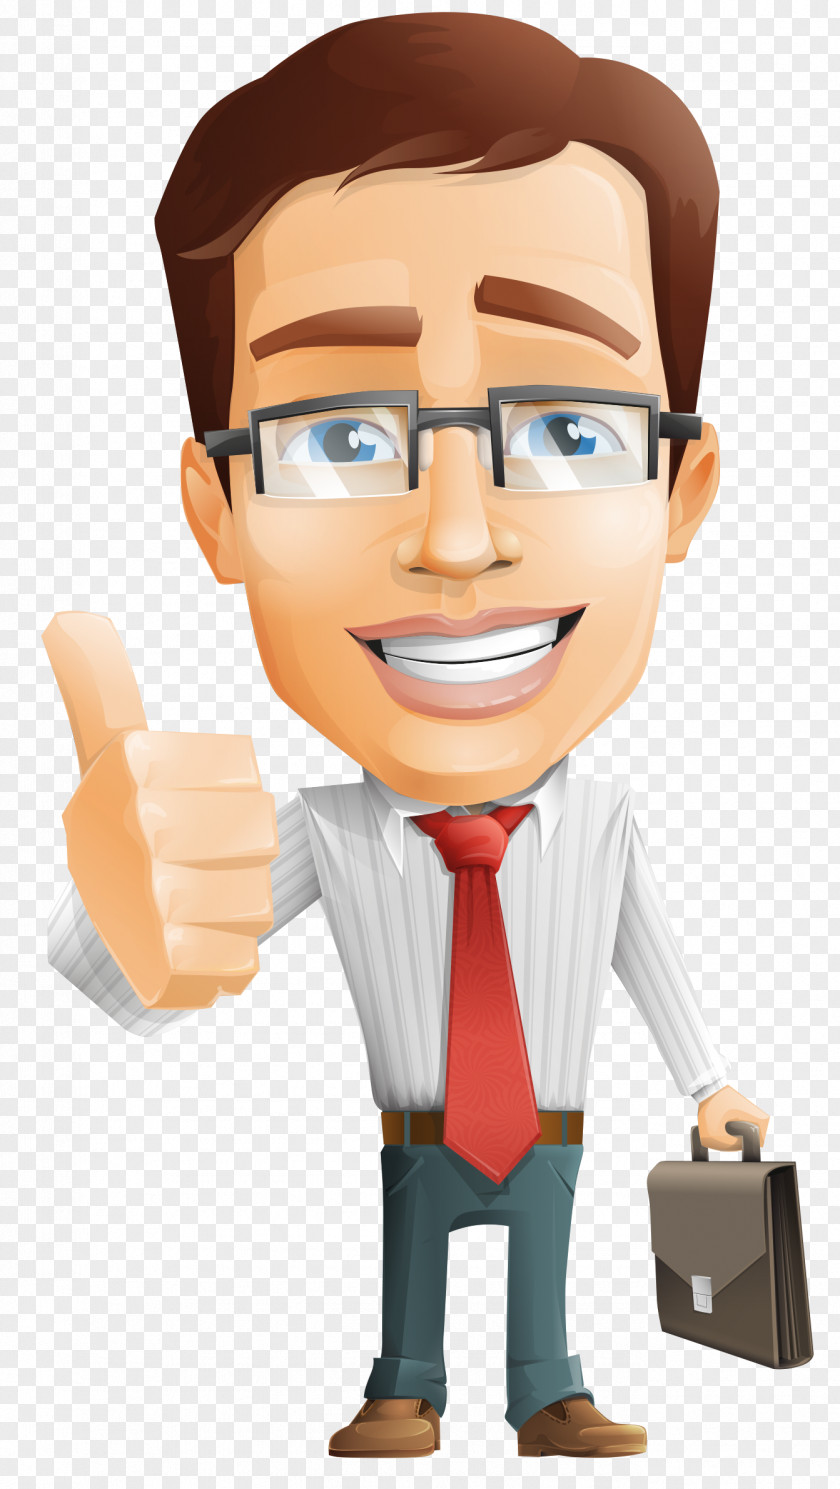 Thinking Man Cartoon Character Businessperson PNG